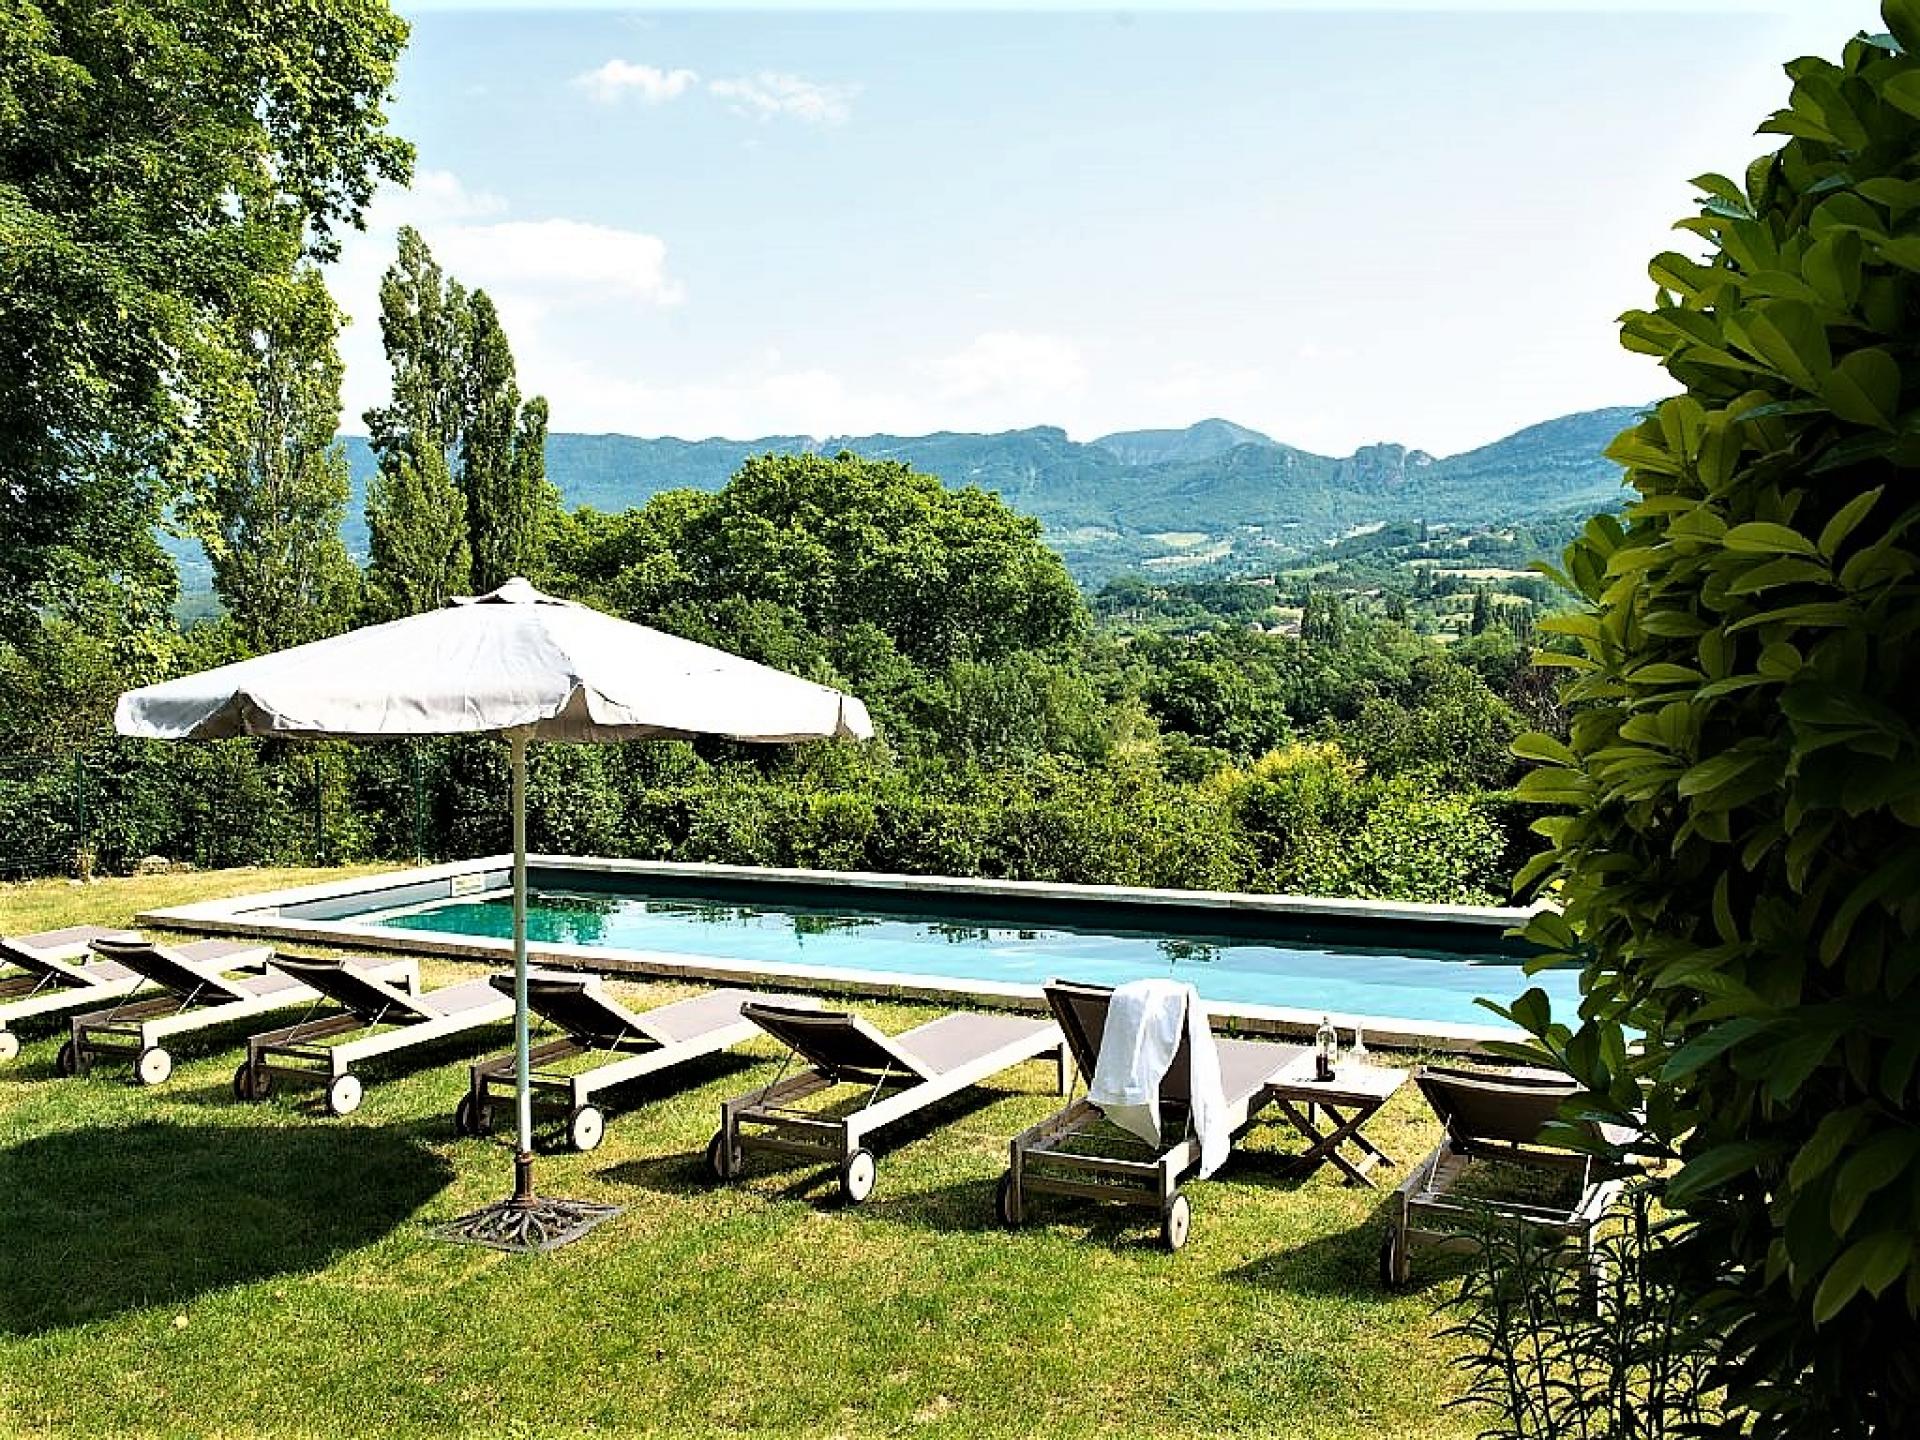 VIEWS ON THE MOUNTAINS FROM THE DOMAINE DE LA DROME SWIMMING POOL